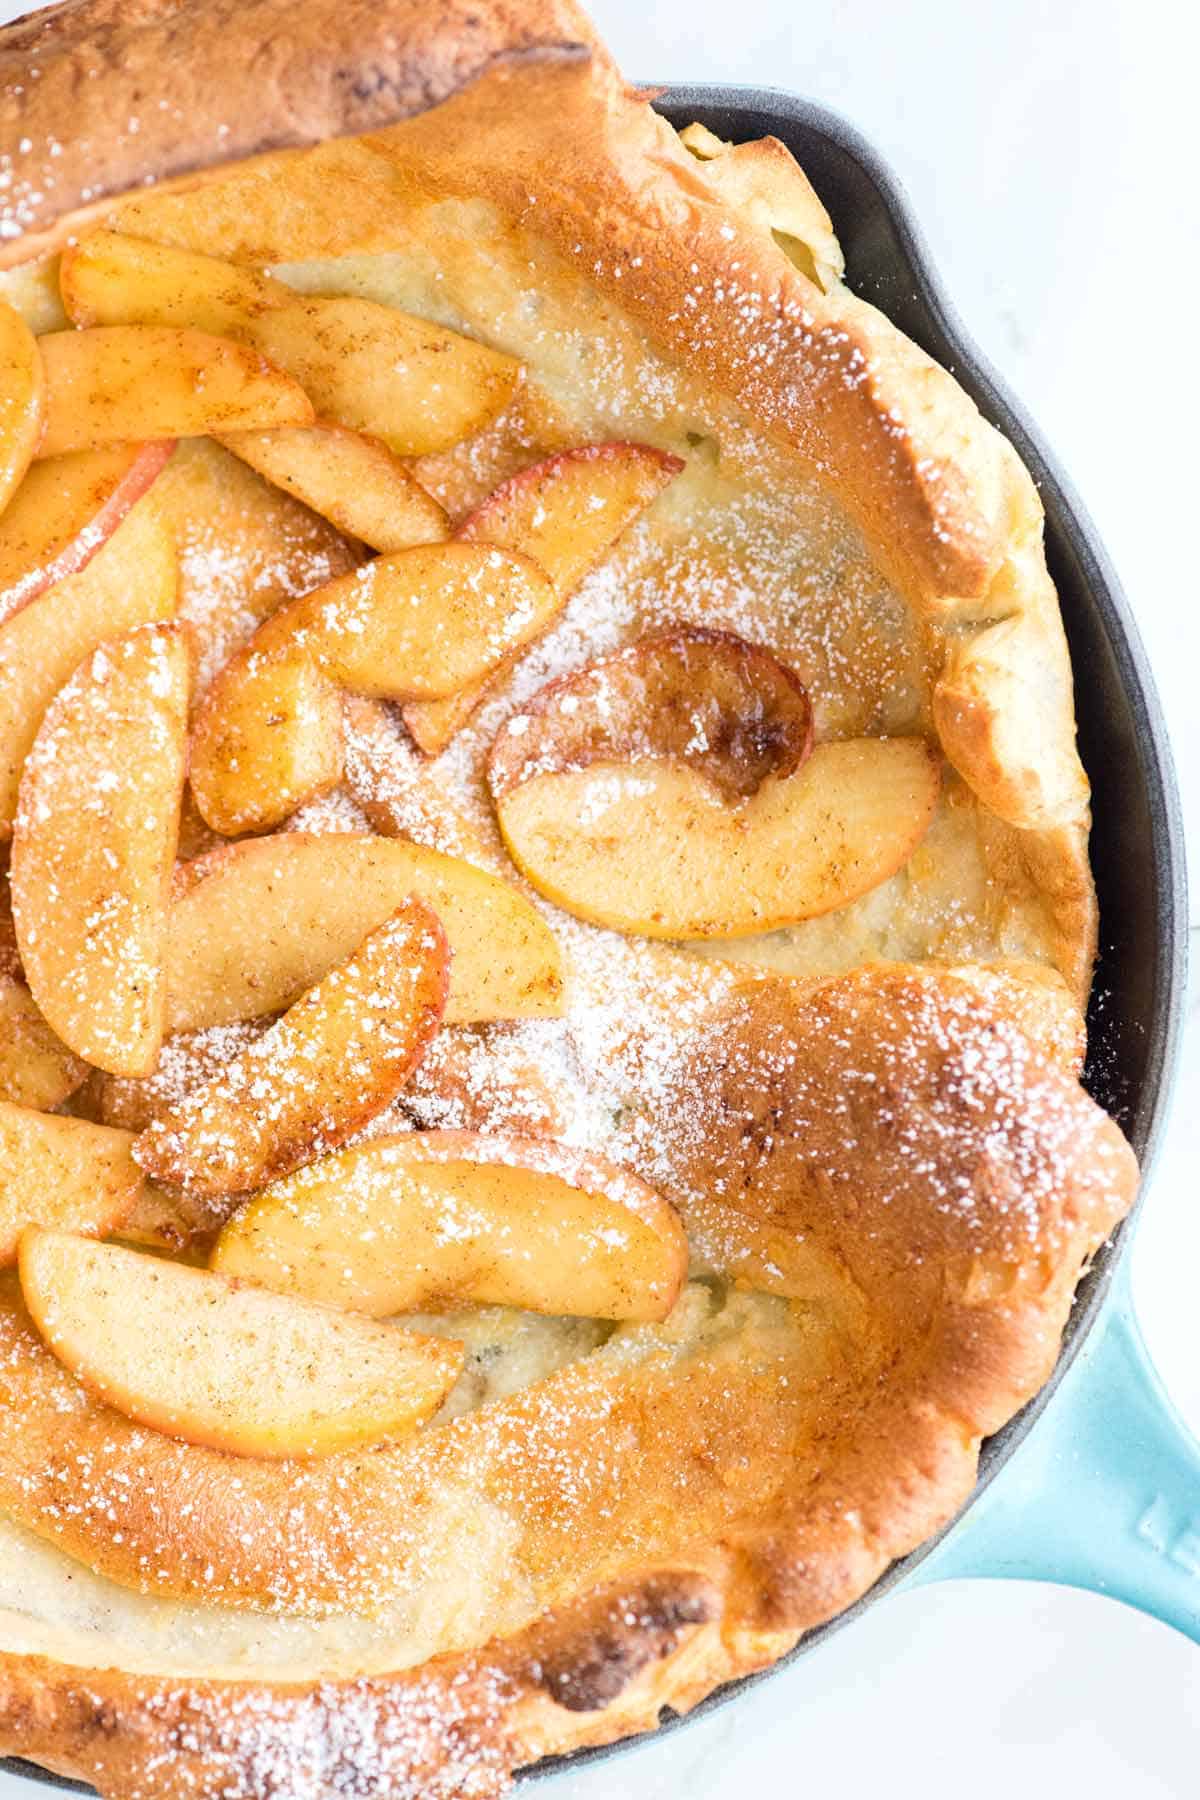 How to Make a Dutch Baby Pancake with Apples